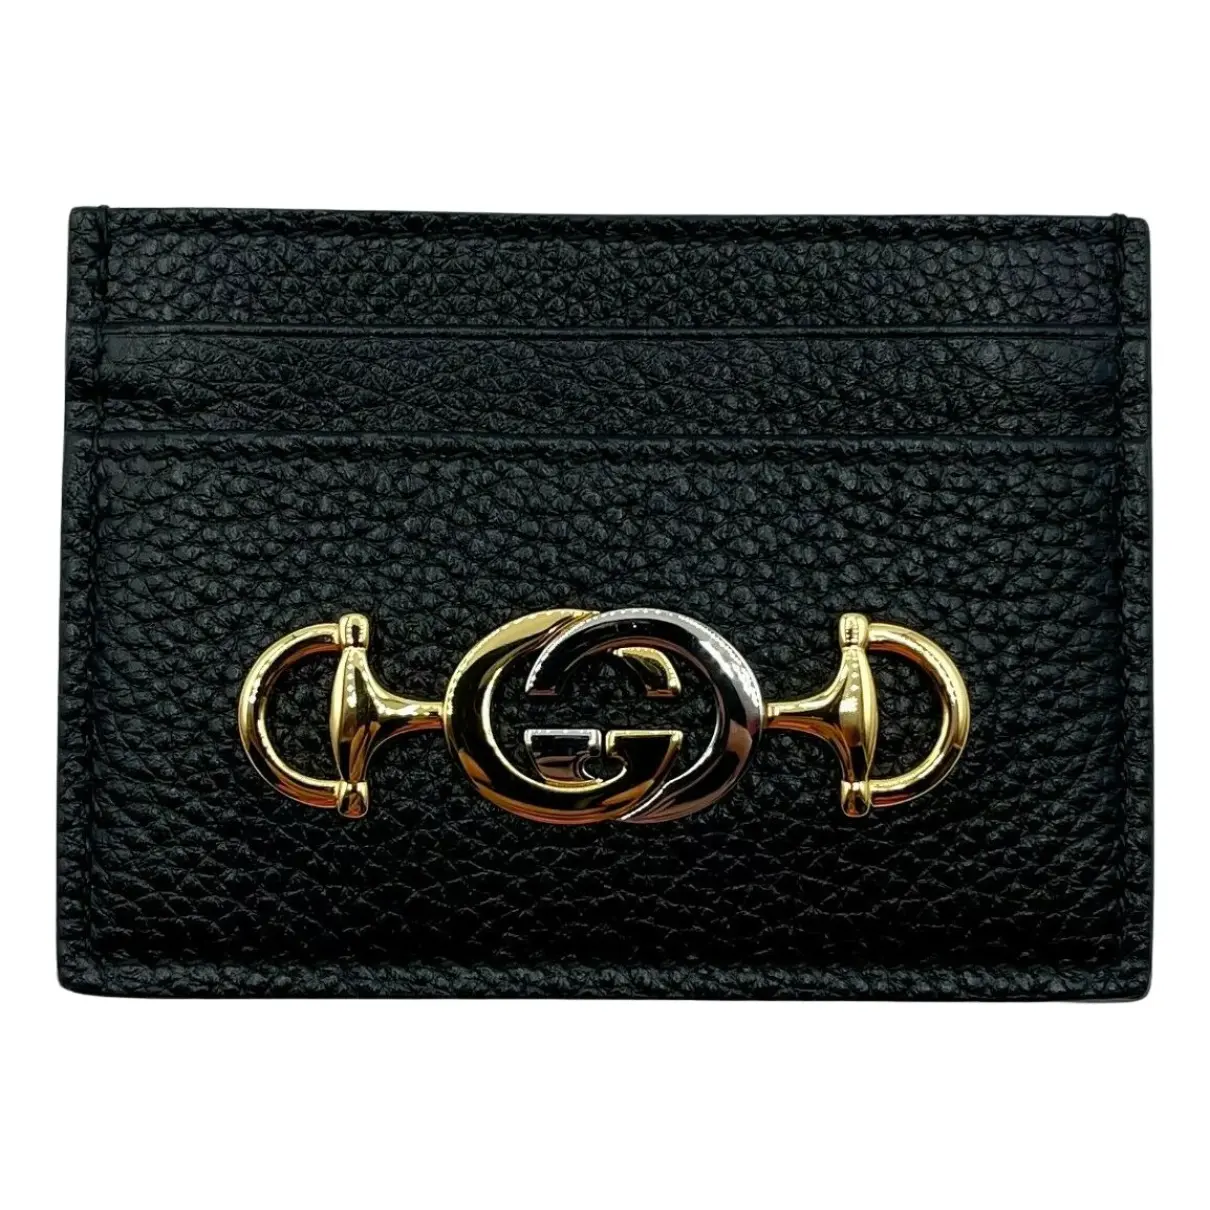 Zumi leather wallet